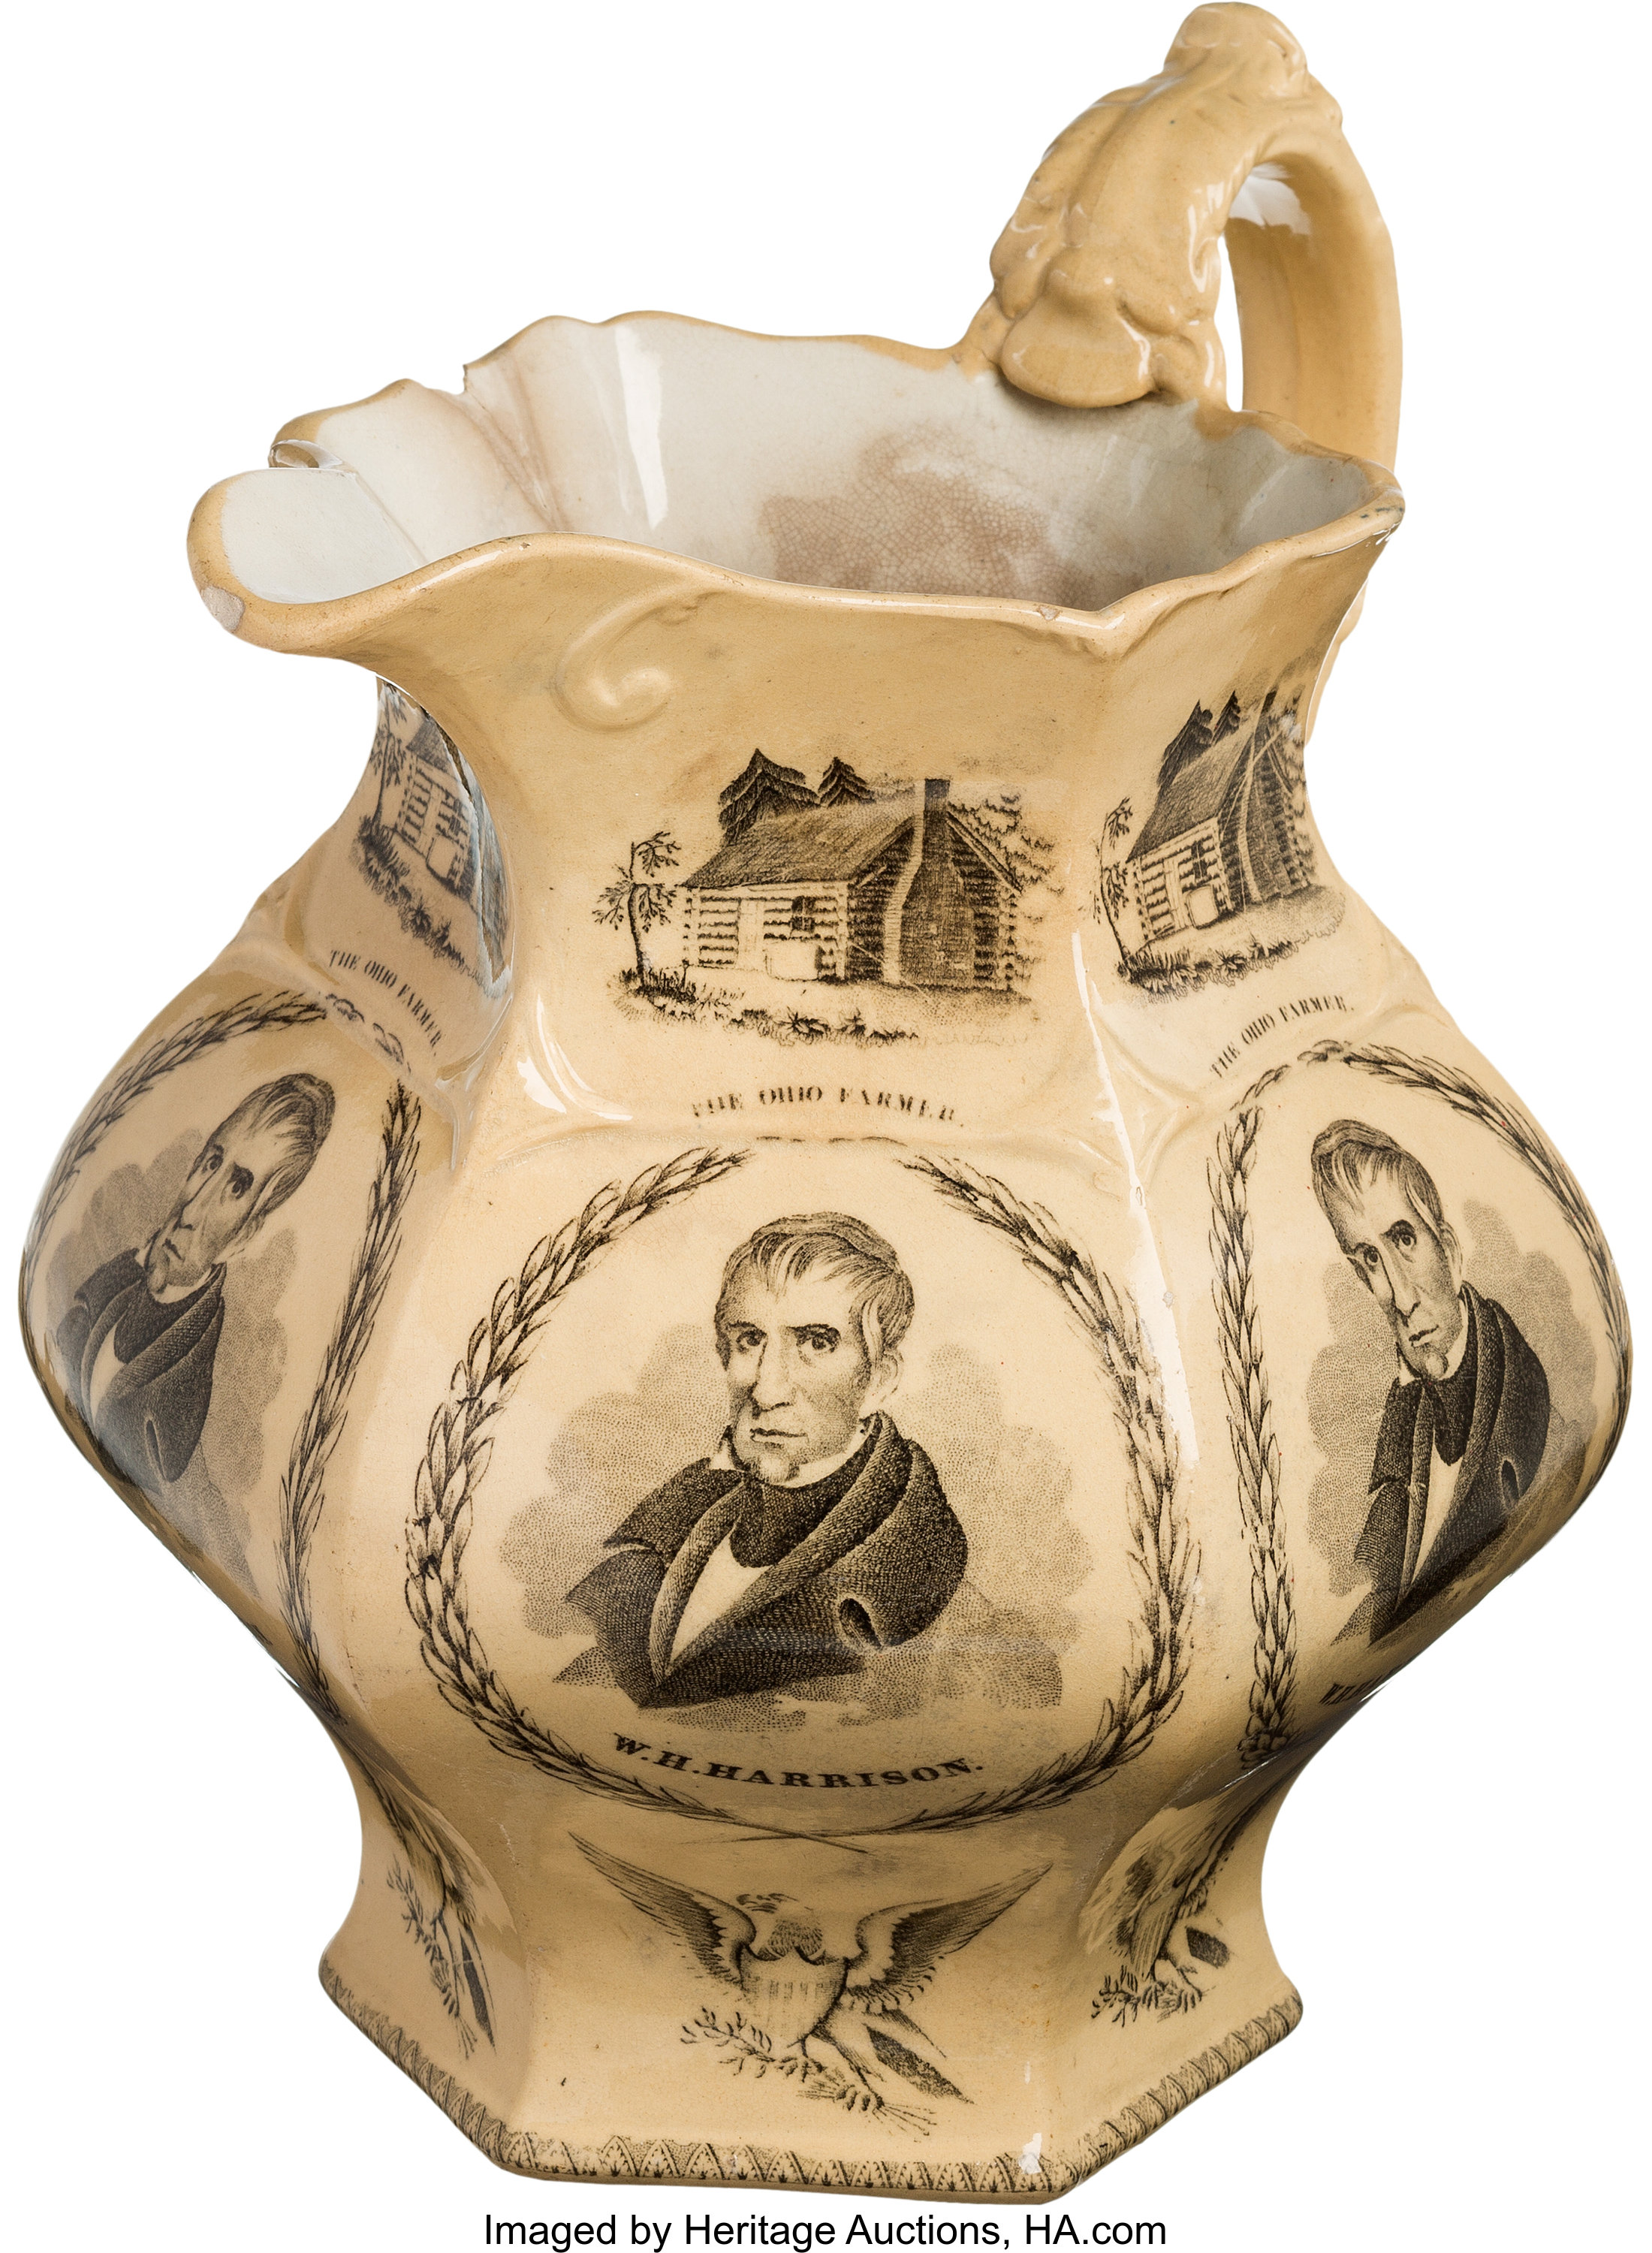 A large (almost a foot tall) ceramic pitcher touting Whig candidate William Henry Harrison's 1840 campaign for president. 